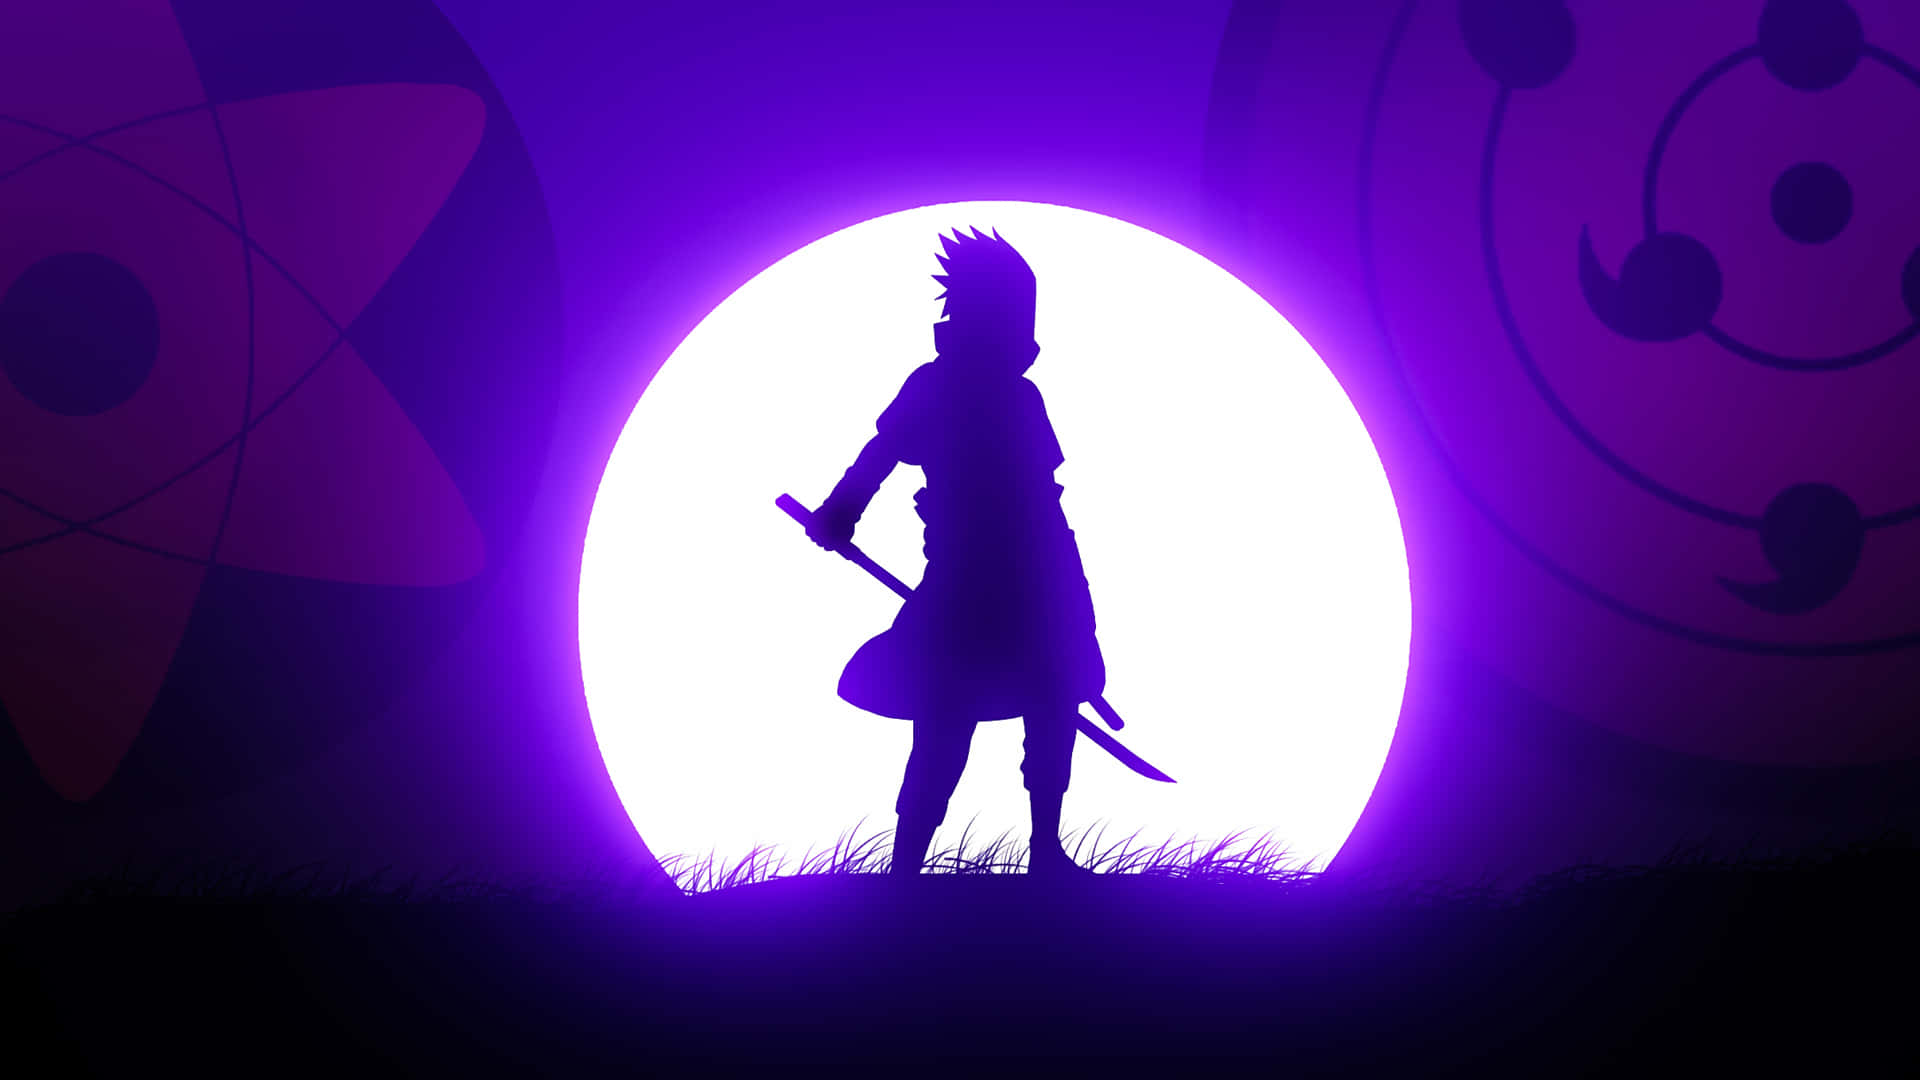 A Silhouette Of A Man With A Sword In Front Of A Purple Light Wallpaper